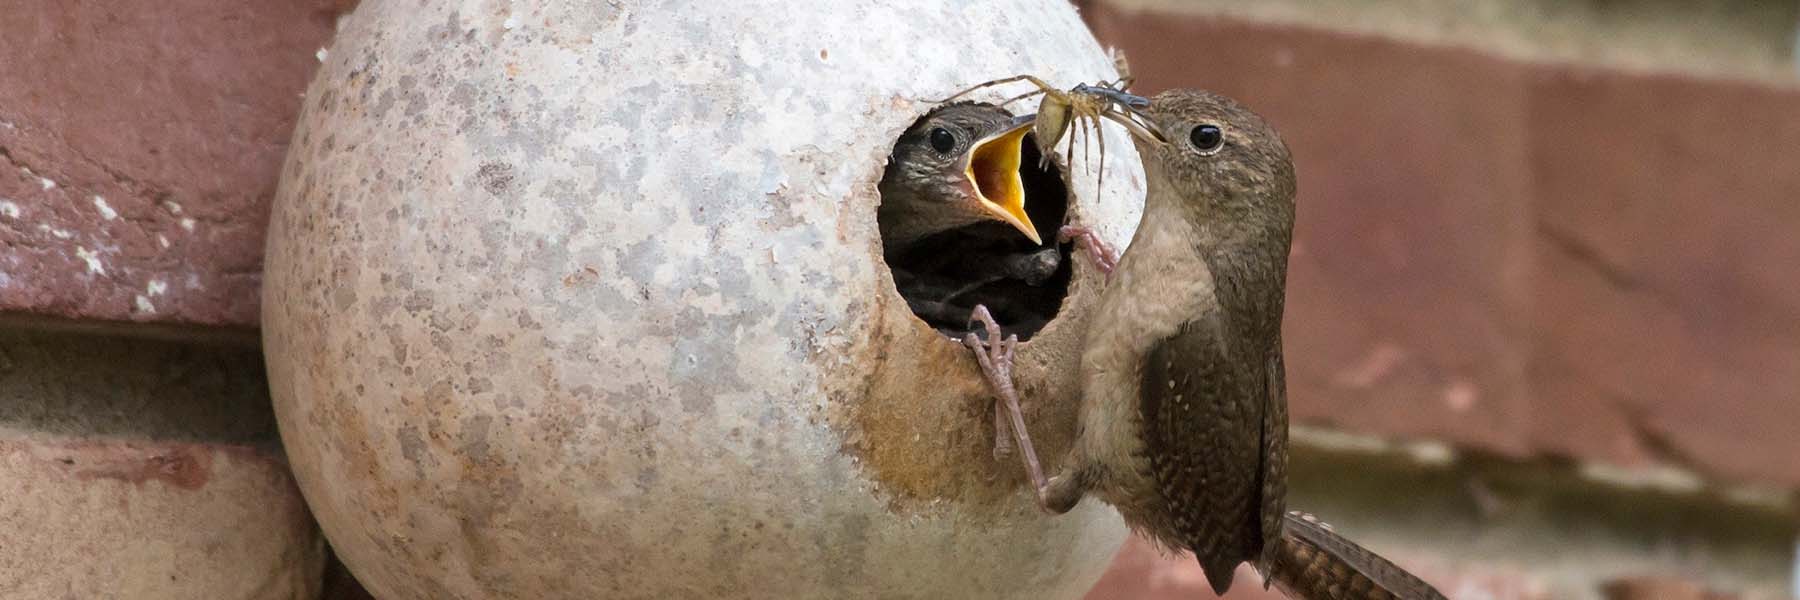 A House Wren clings to the gourd in which it has created its nest. A nearly fully grown nestling reaches out of the hole in the gourd to accept a spider from its parent.